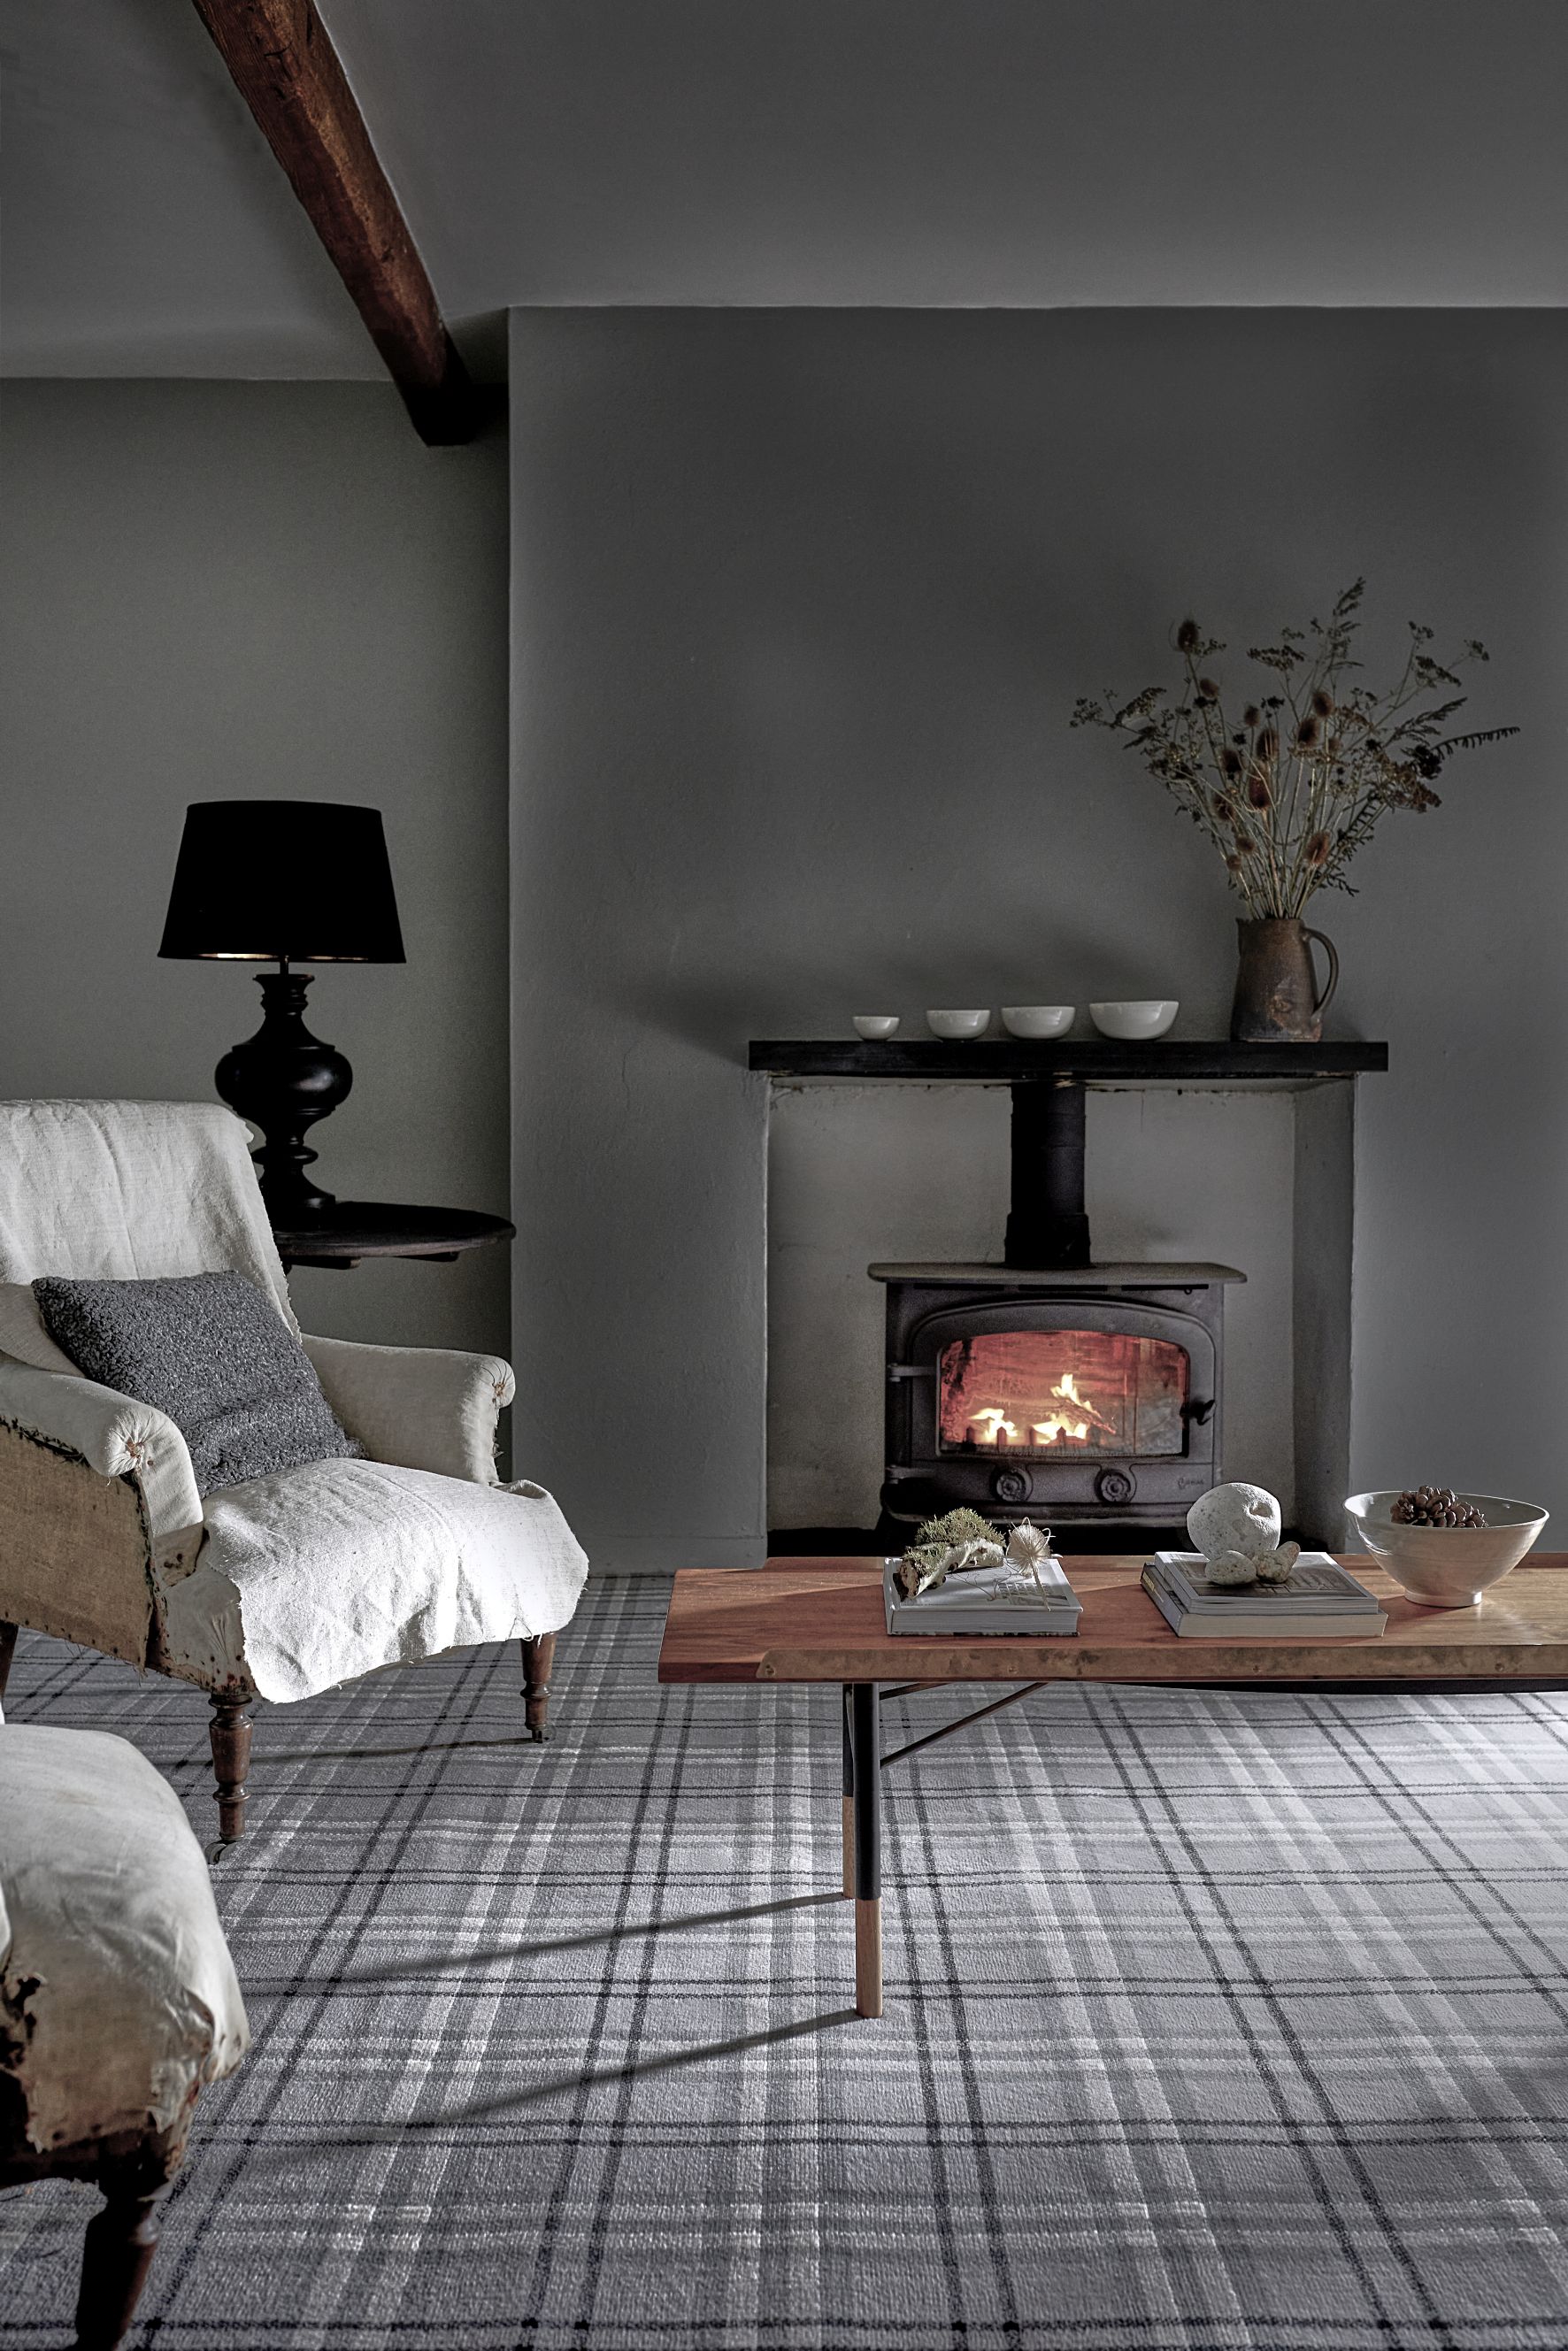 a Carpetright a/w gray living room with dark and wooden accessories